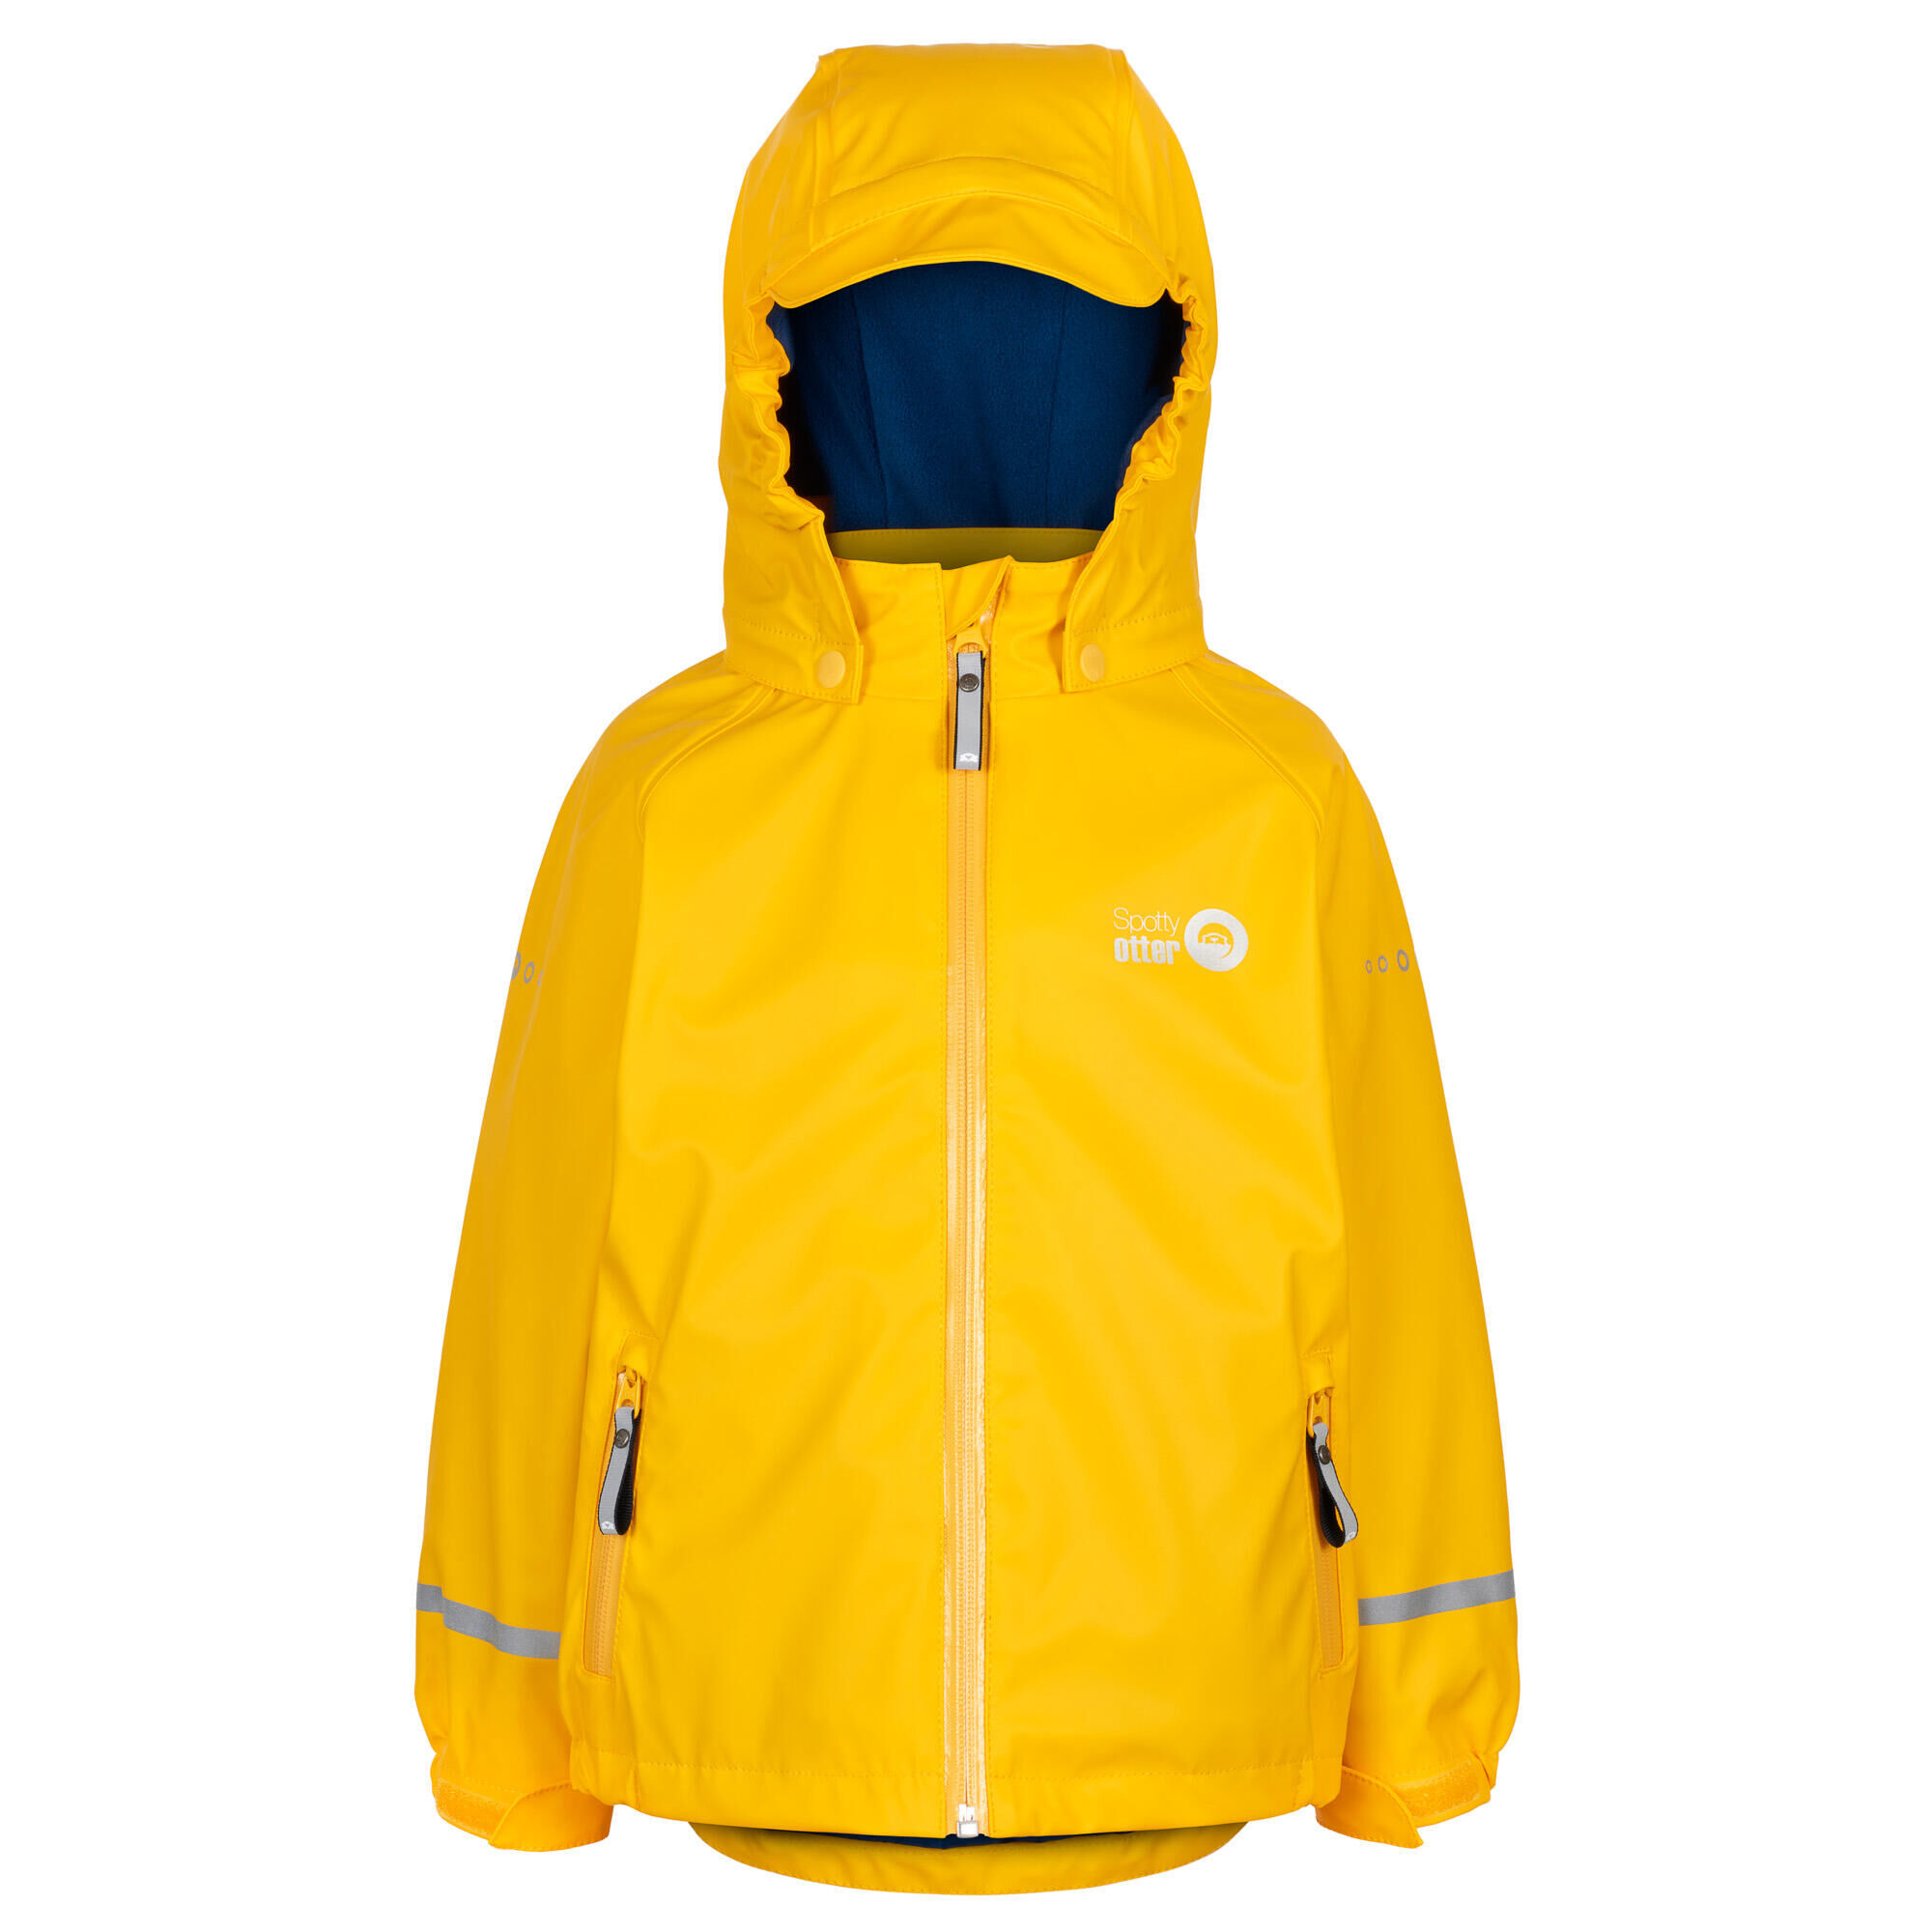 SPOTTY OTTER Spotty Otter Forest Leader Insulated PU Jacket Yellow